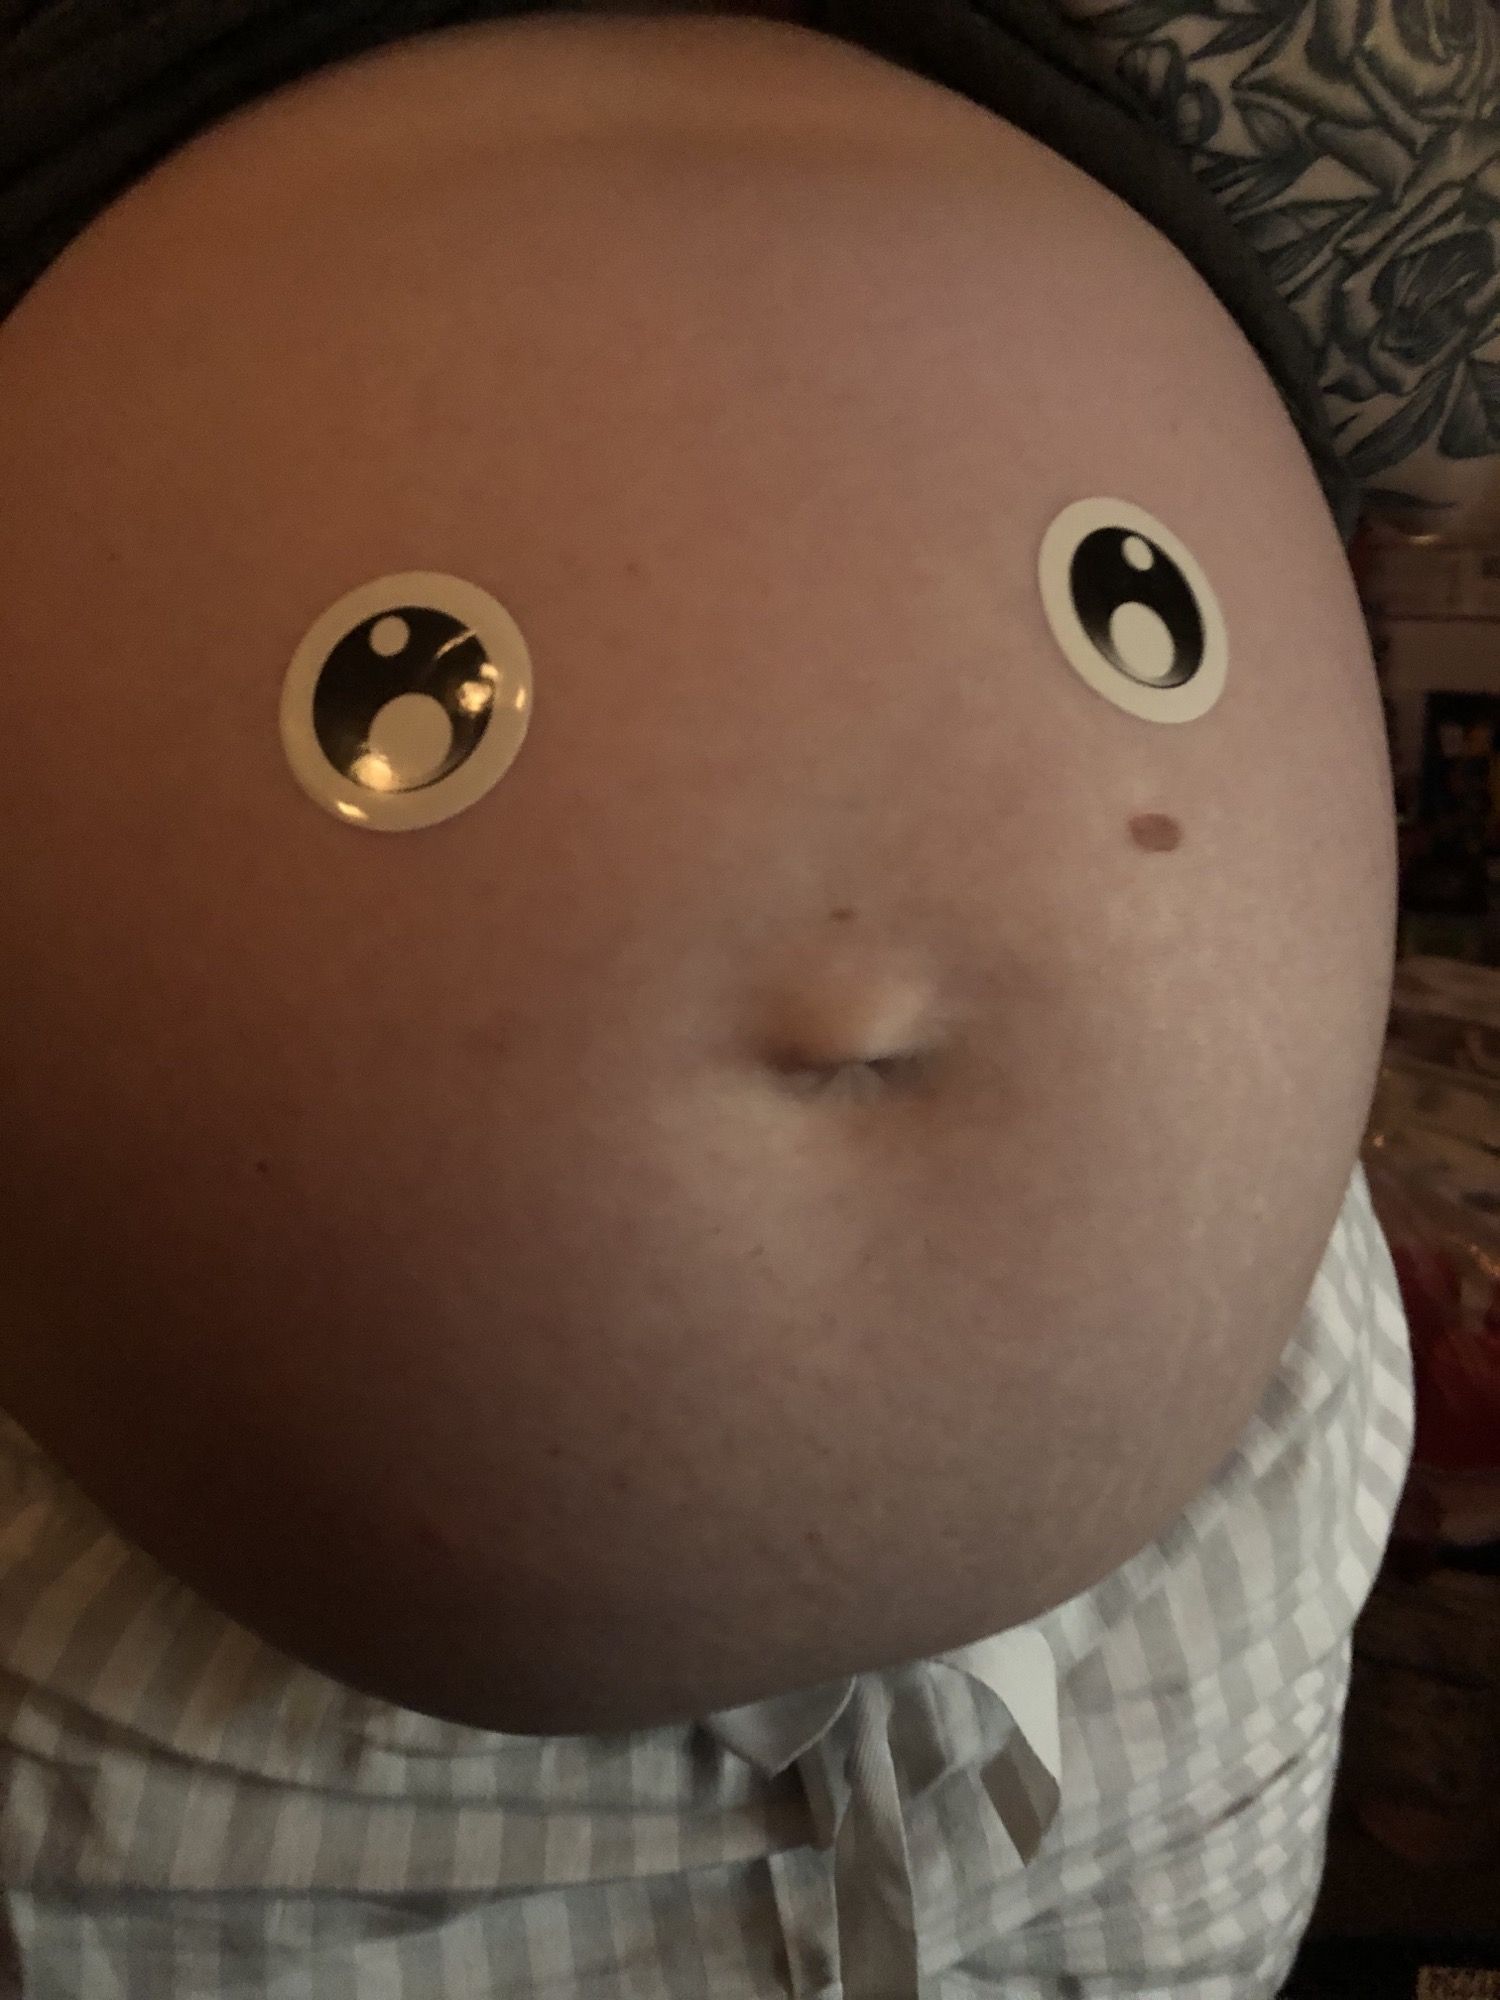 My girlfriend added stickers to her pregnant belly, and I’m crying